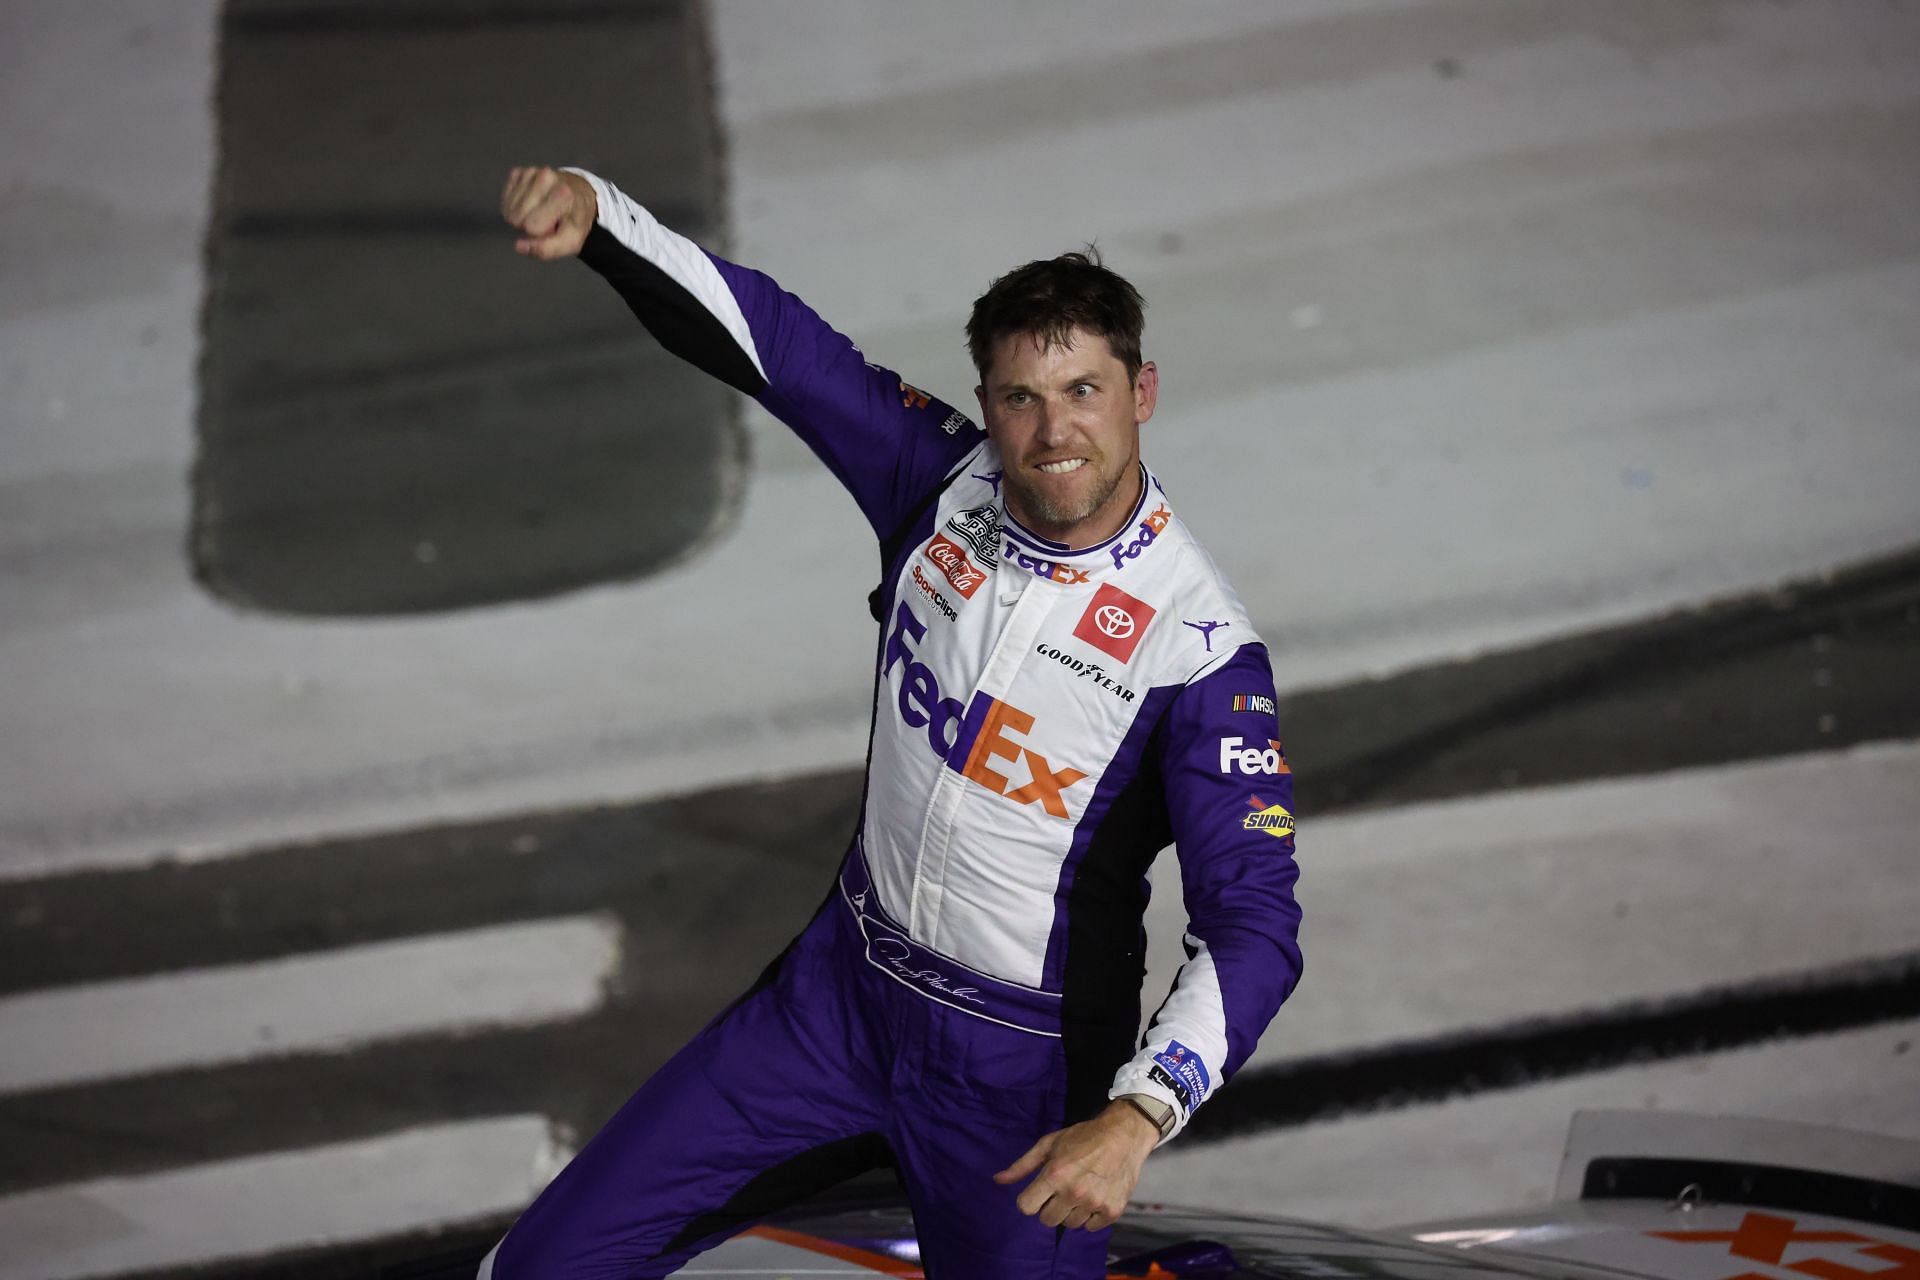 Denny Hamlin celebrates after winning the 2022 NASCAR Cup Series Coca-Cola 600 at Charlotte Motor Speedway in Concord, North Carolina. (Photo by James Gilbert/Getty Images)